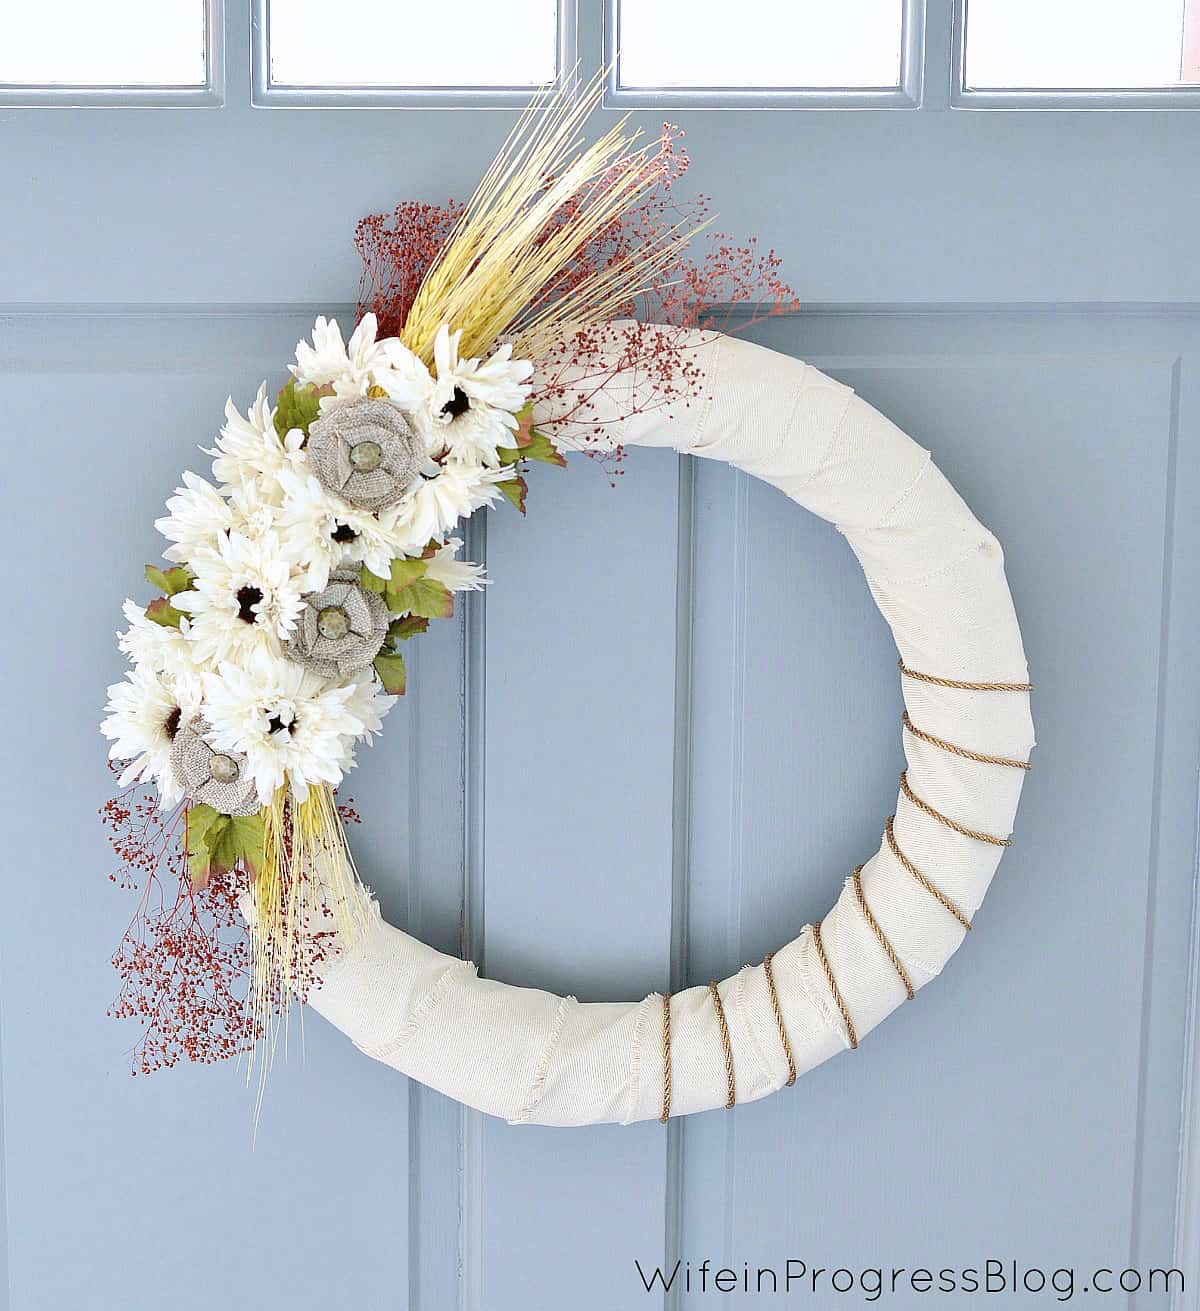 Hanging a wreath on your front door is the perfect way to welcome fall to your home